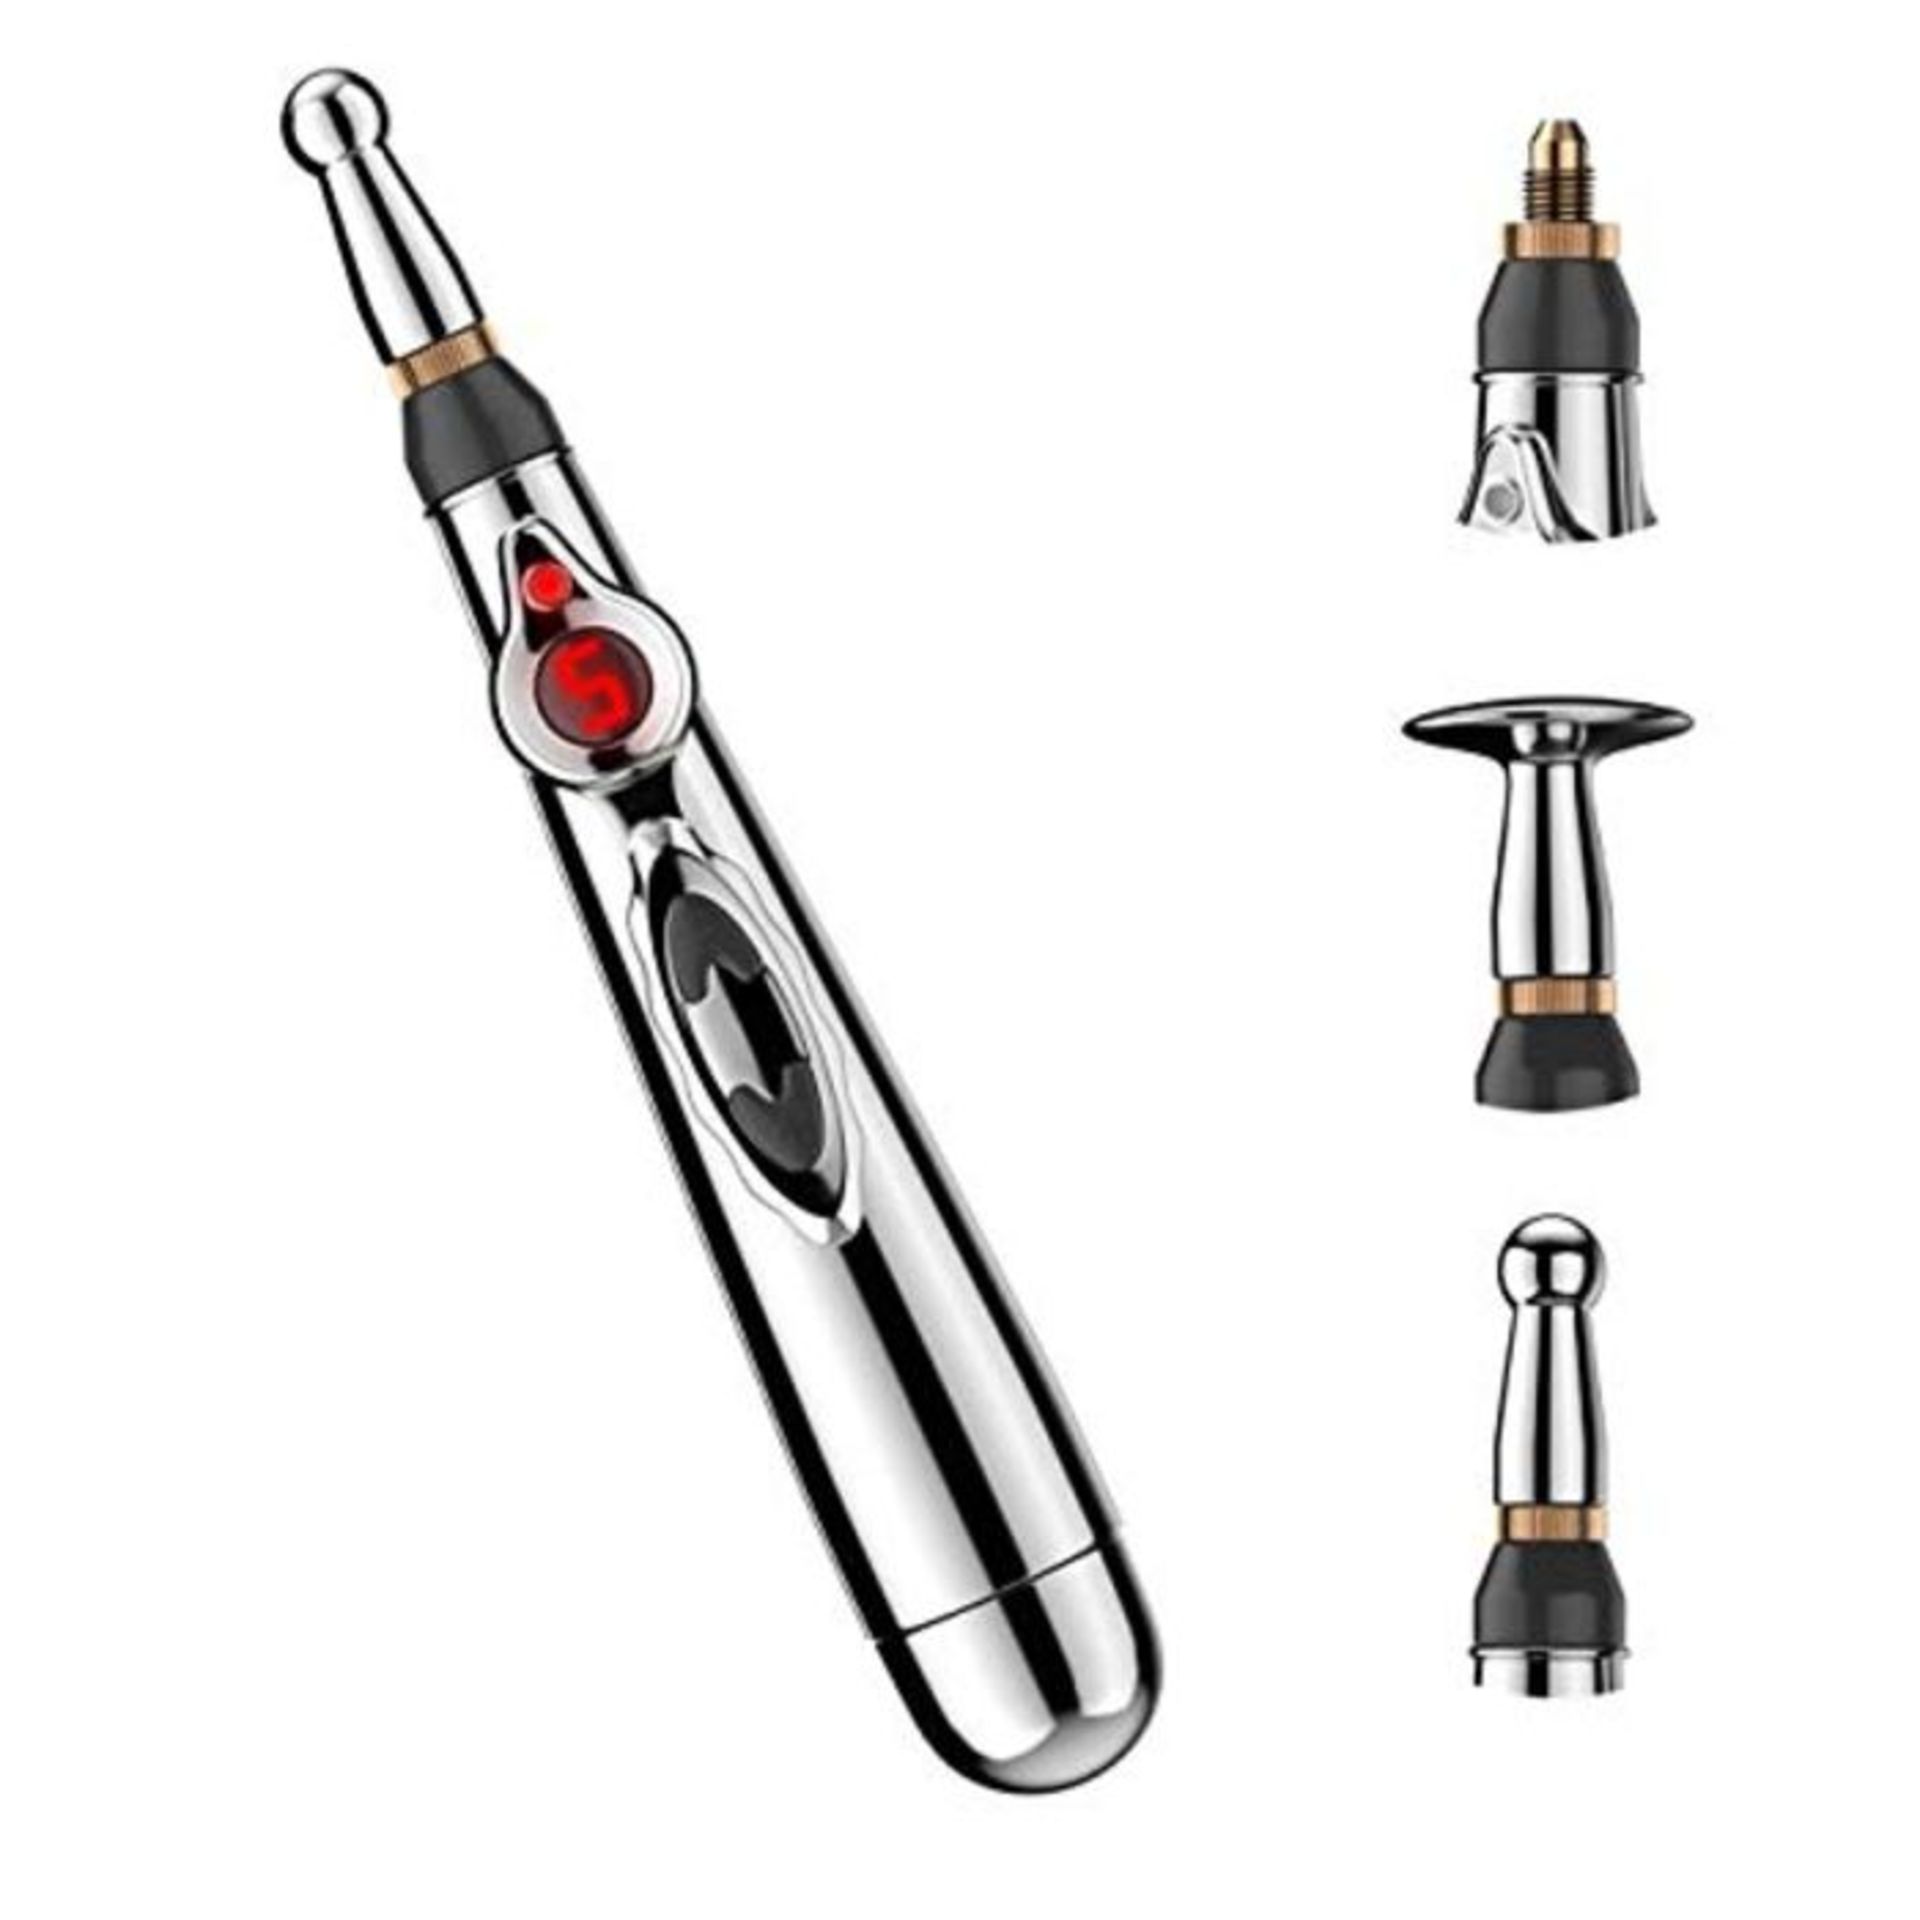 Acupuncture Pen, SUPERFA 3 in 1 Acupuncture Meridian Massage Pen Relief Pain Therapy T